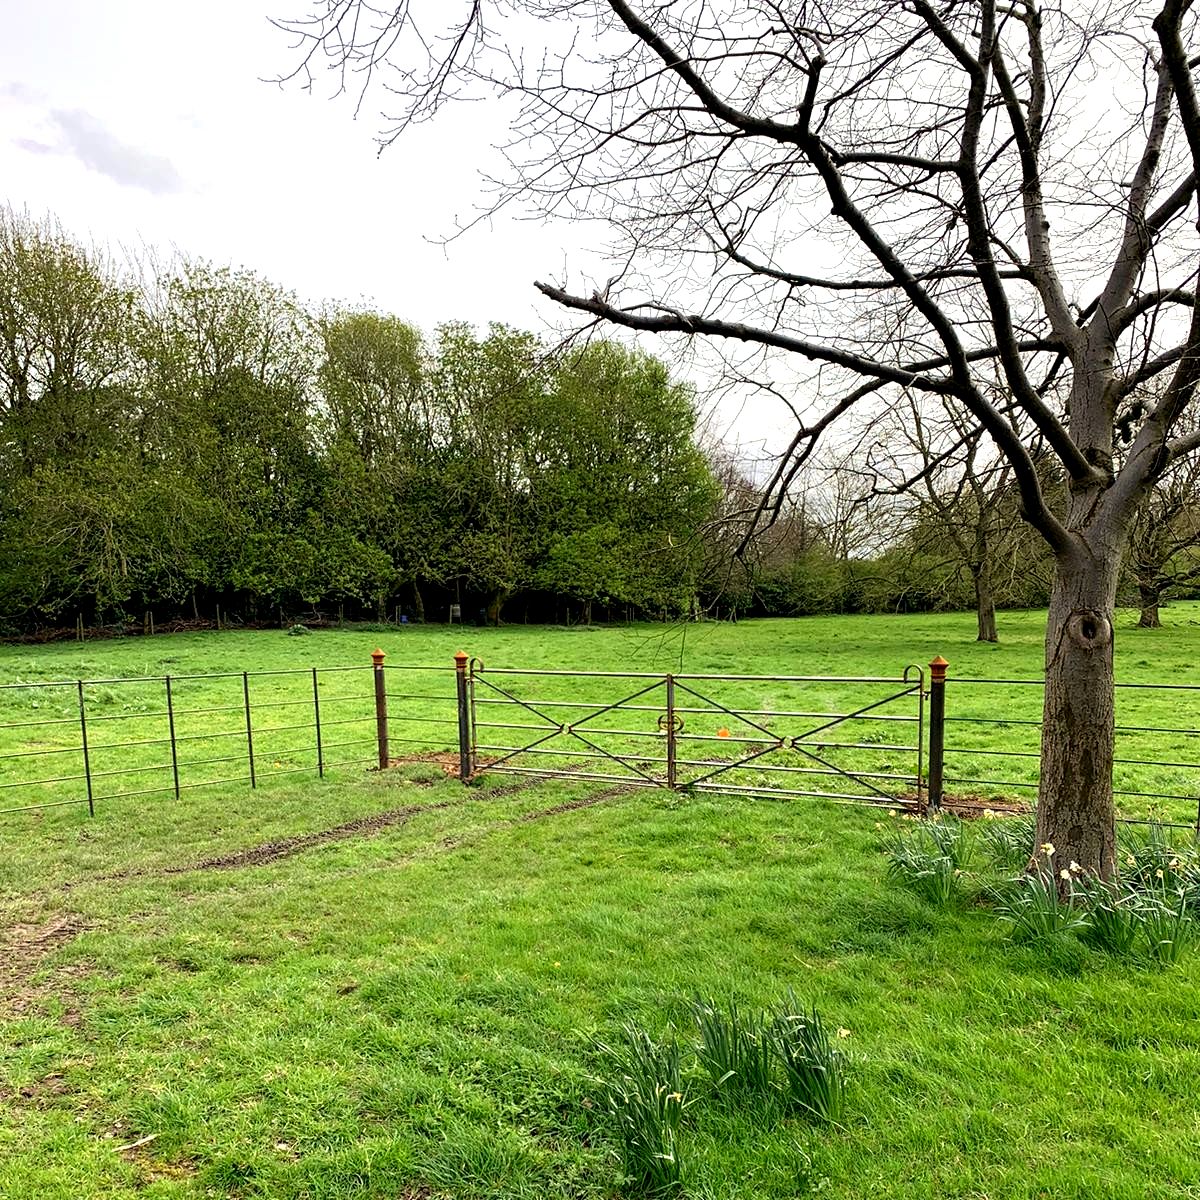 Quadrant field gates in Lincolnshire. Left to rust naturally the fence and gate will blend beautifully with the naturally woodland surroundings. 

It will be great to see how it is looking in the future once fully rusted.

#fence
#gate
#rustnaturally
#rustonly
#thetraditionalco